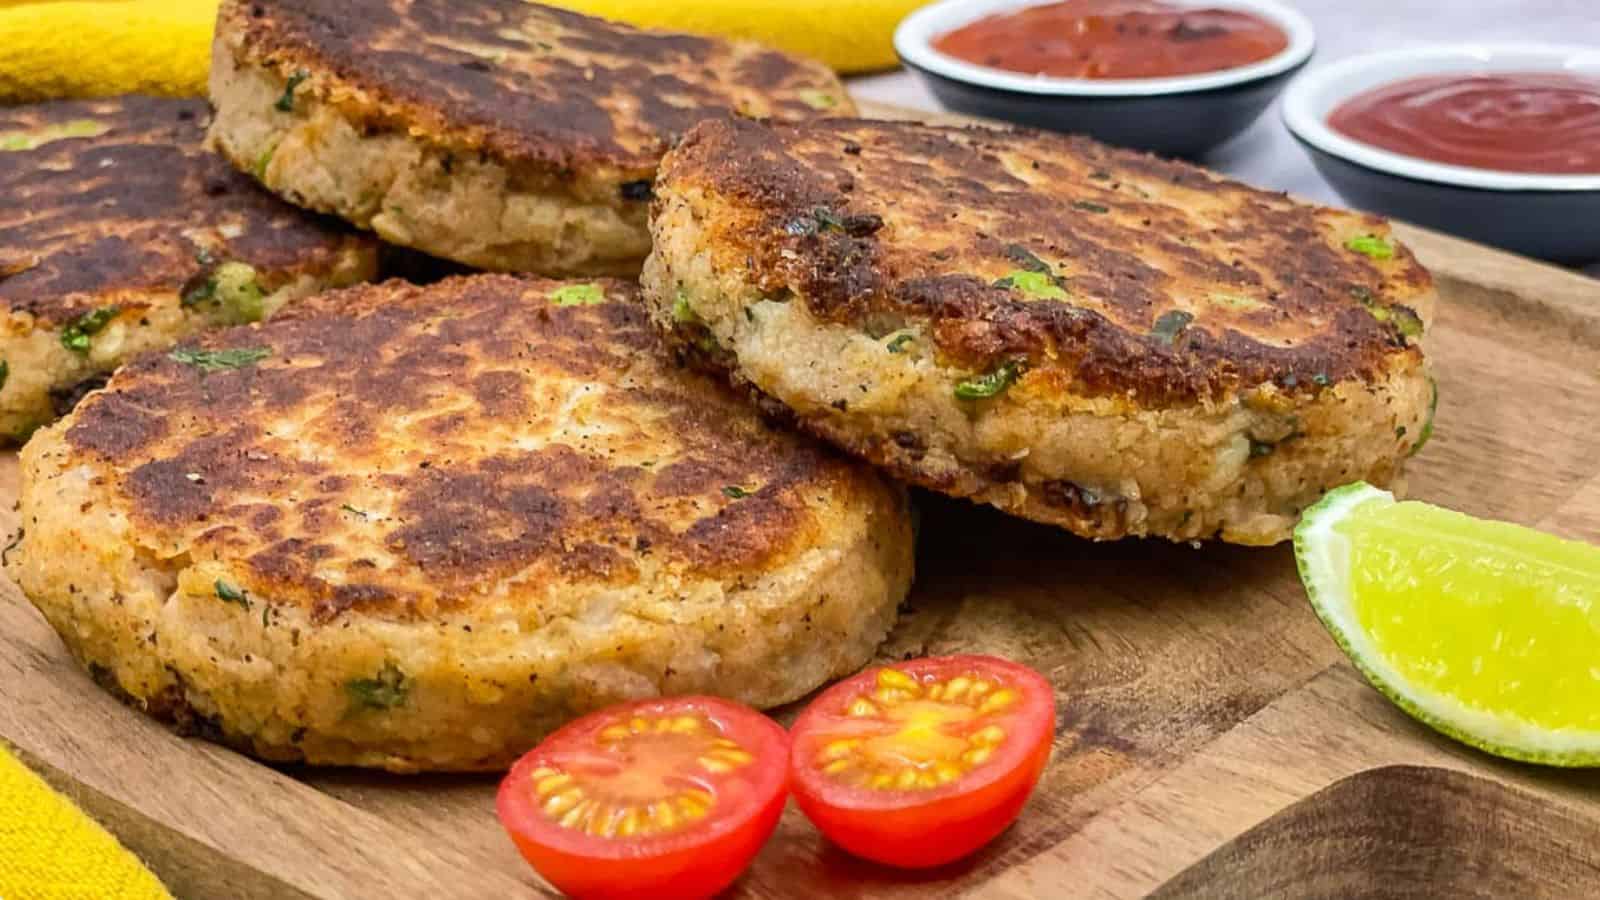 International potato cakes with tomatoes and ketchup on a wooden cutting board.